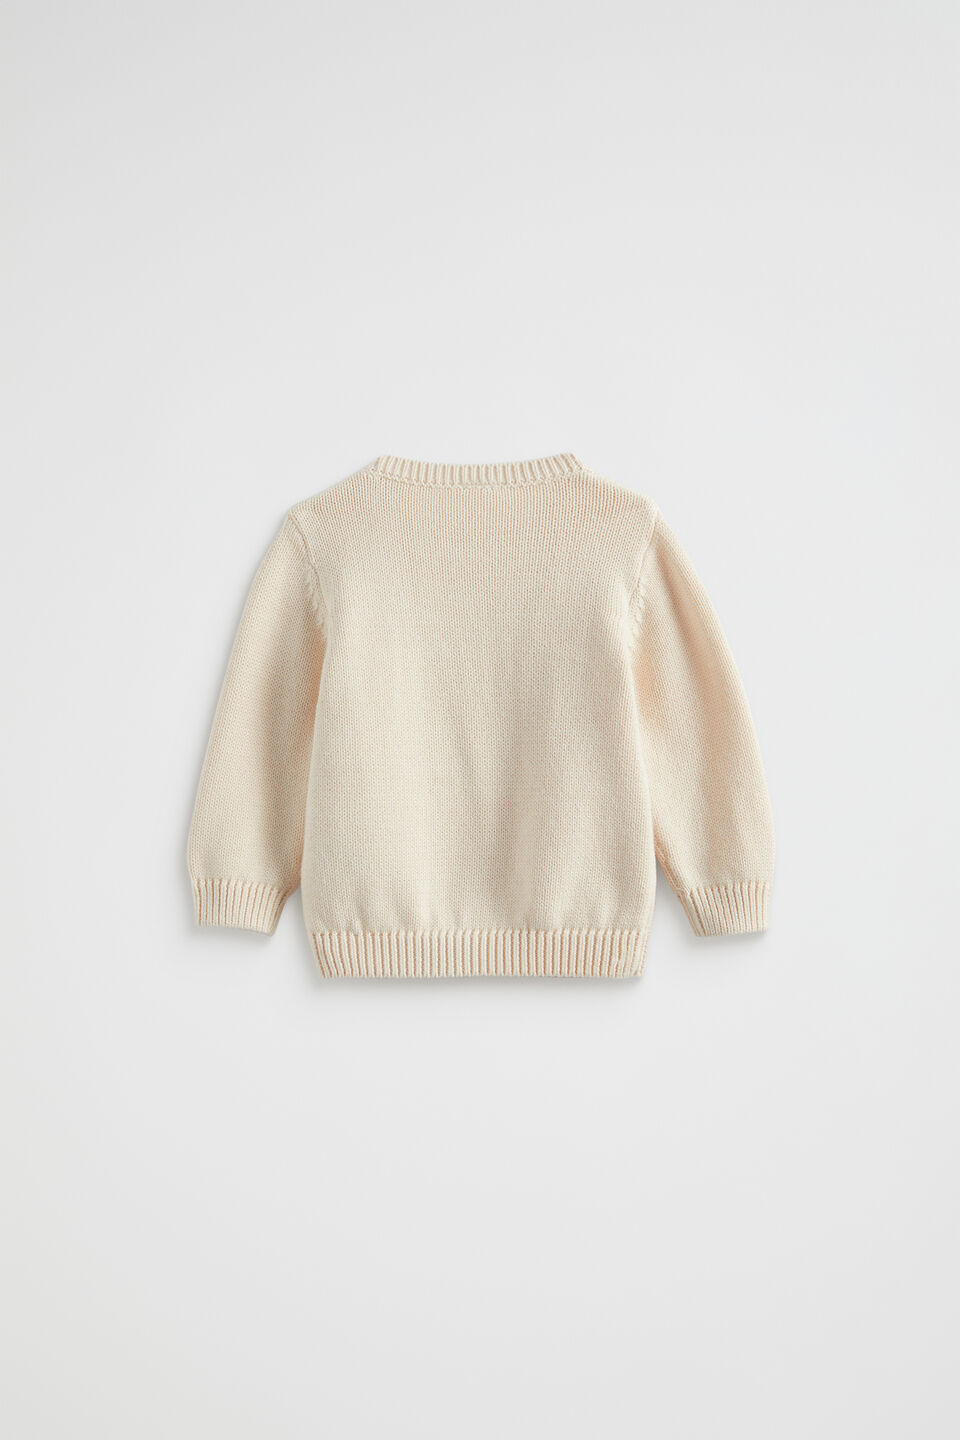 Bunny Knit Sweater  Creme